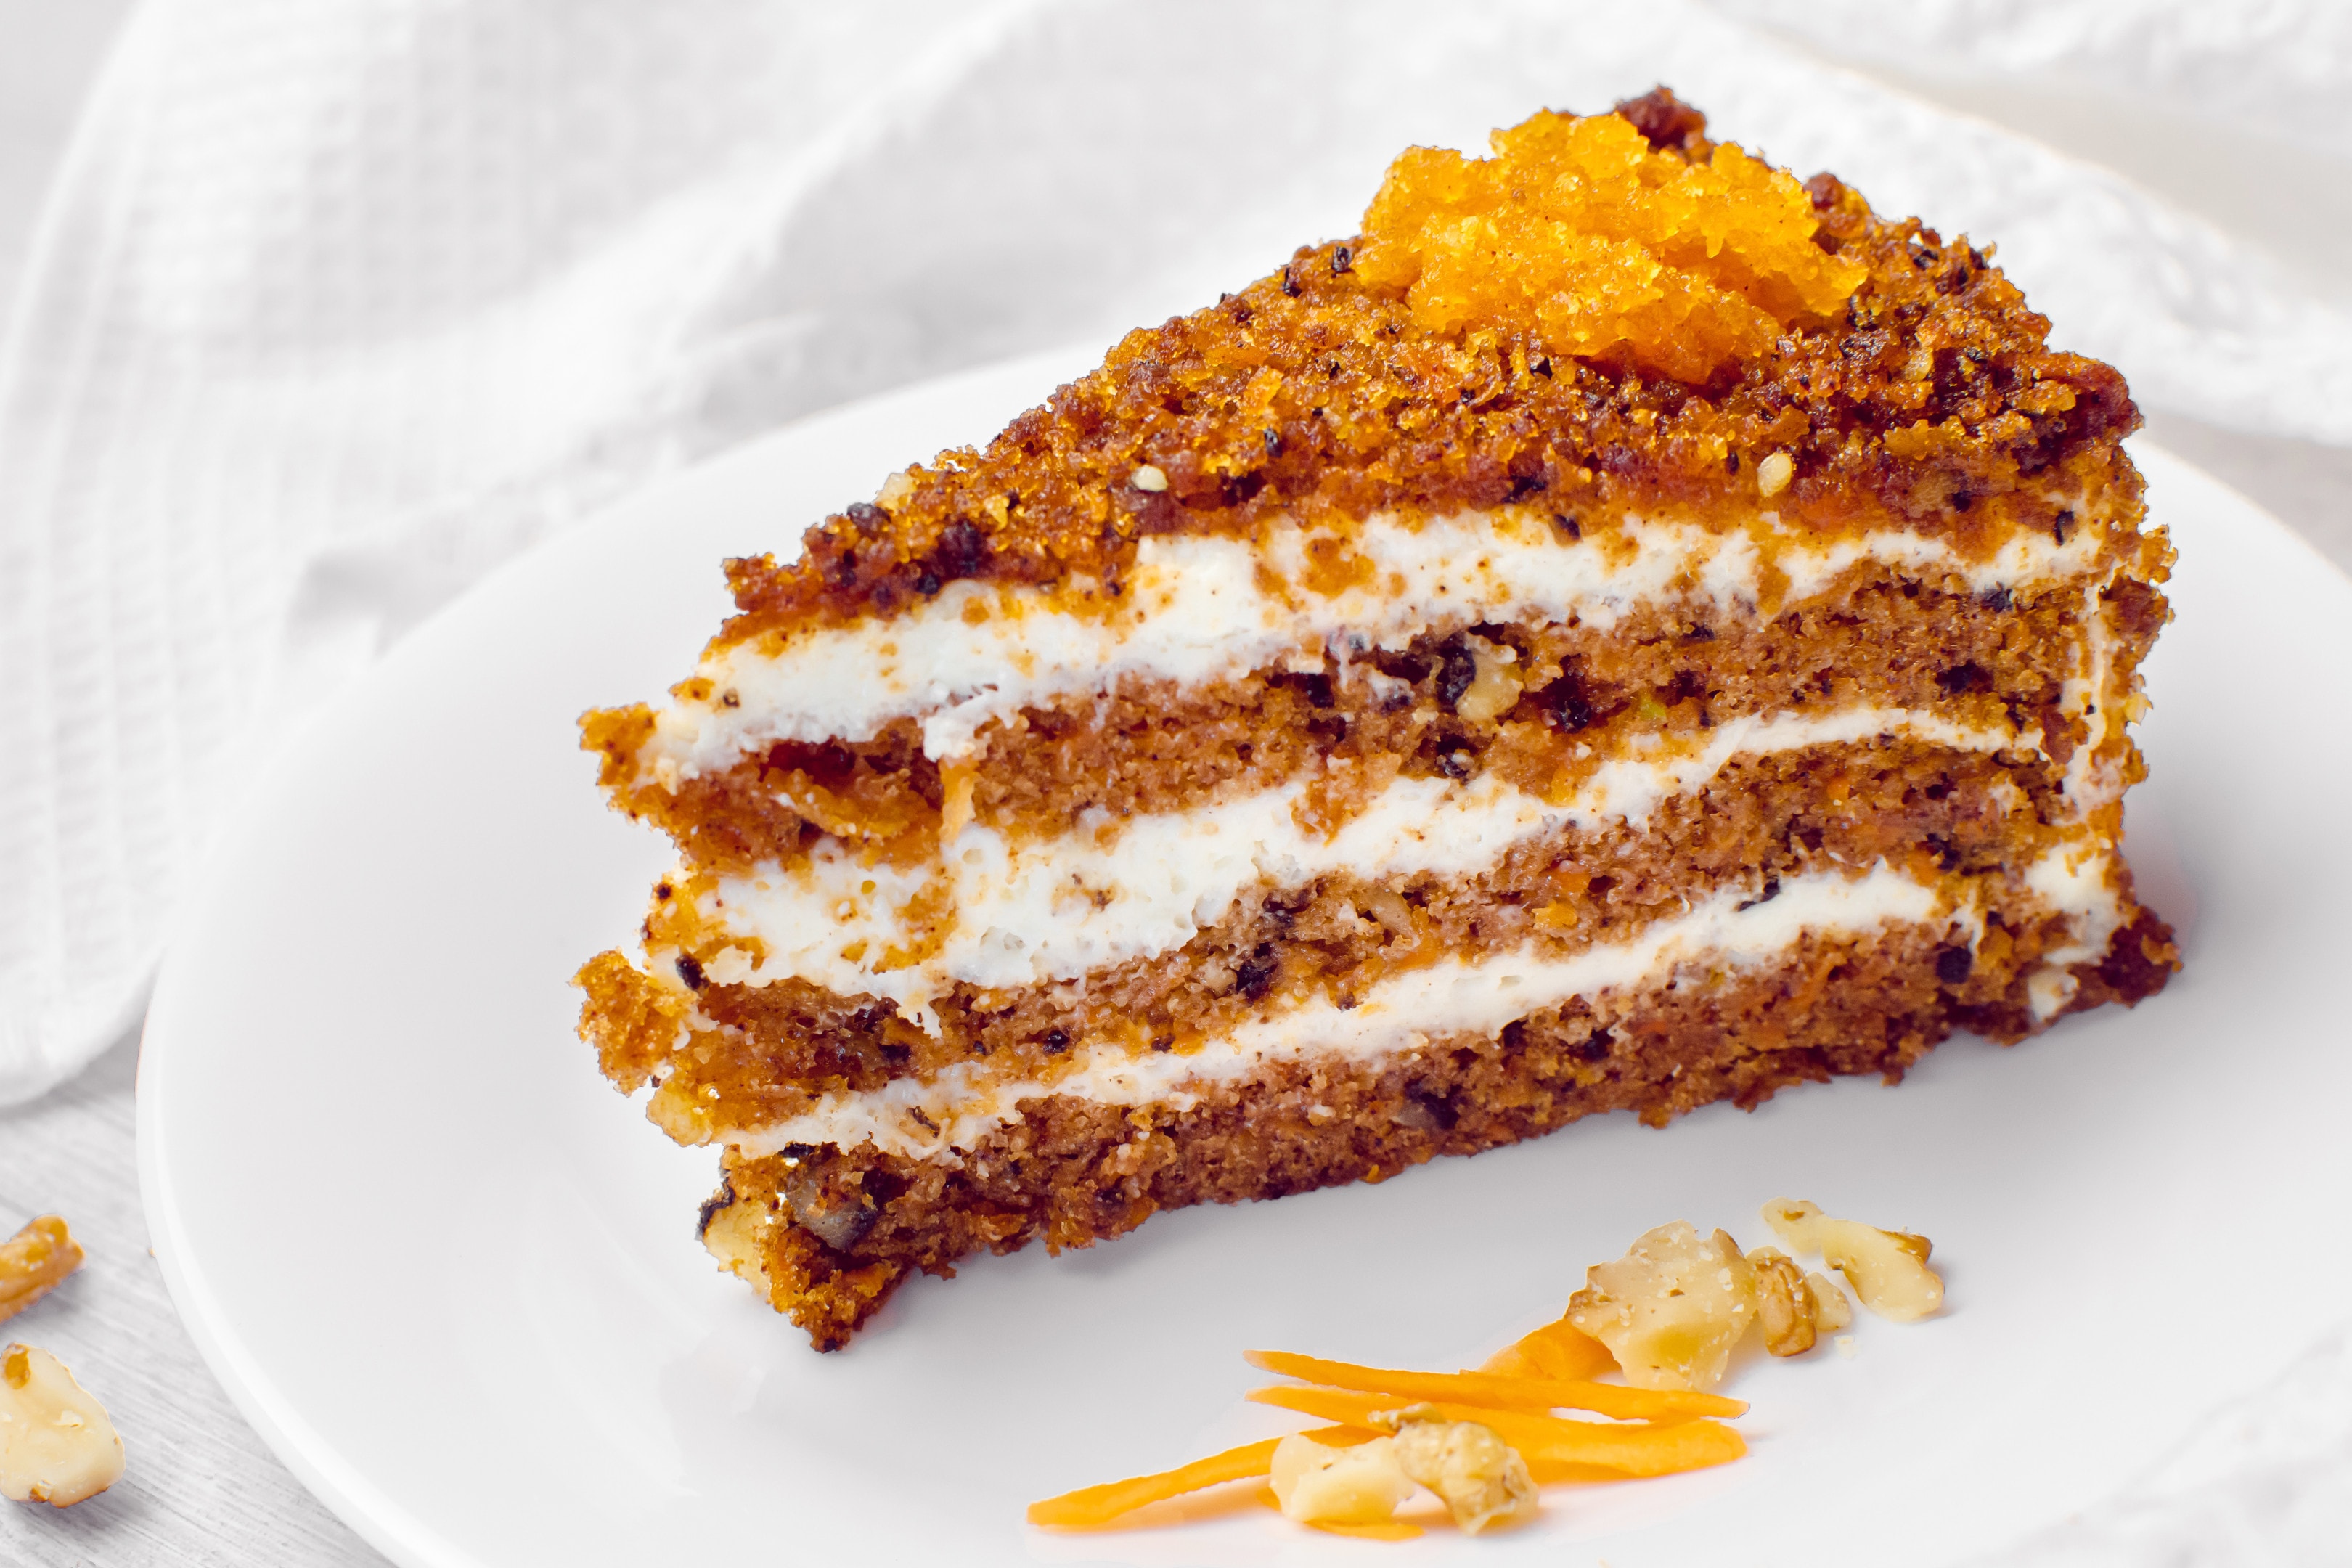 A piece of carrot cake with walnuts